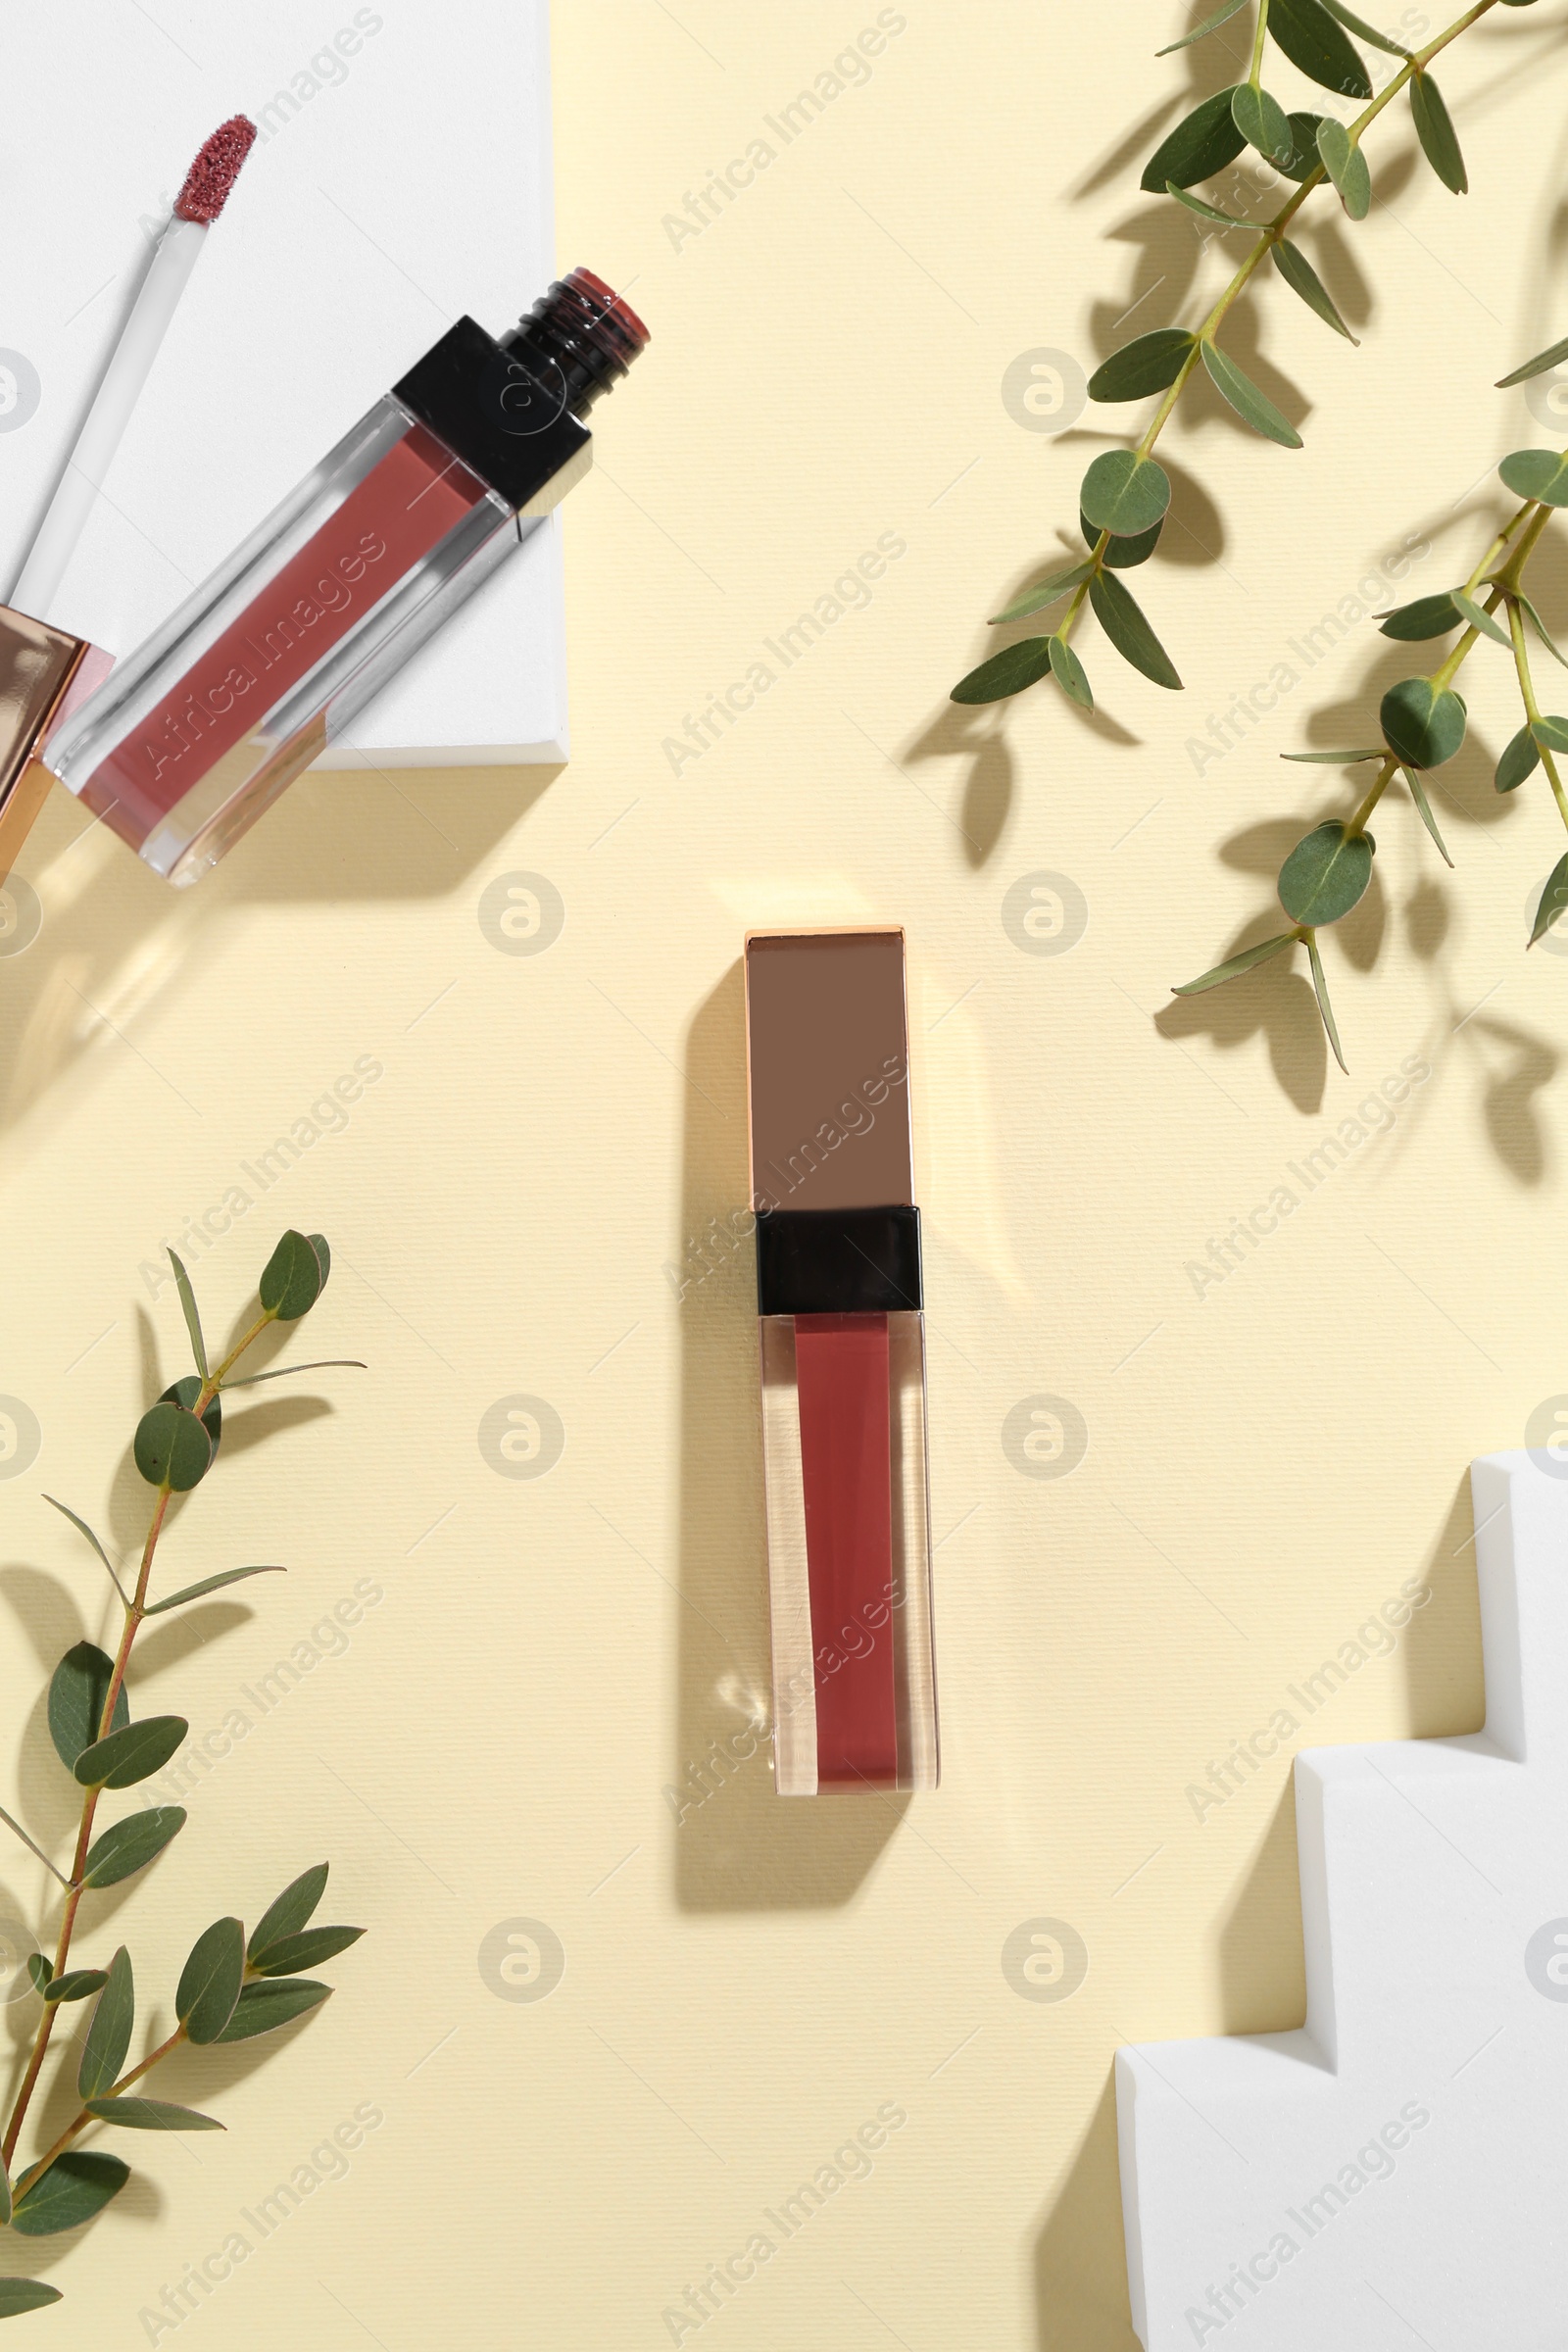 Photo of Lip glosses, podiums and green leaves on pale yellow background, flat lay